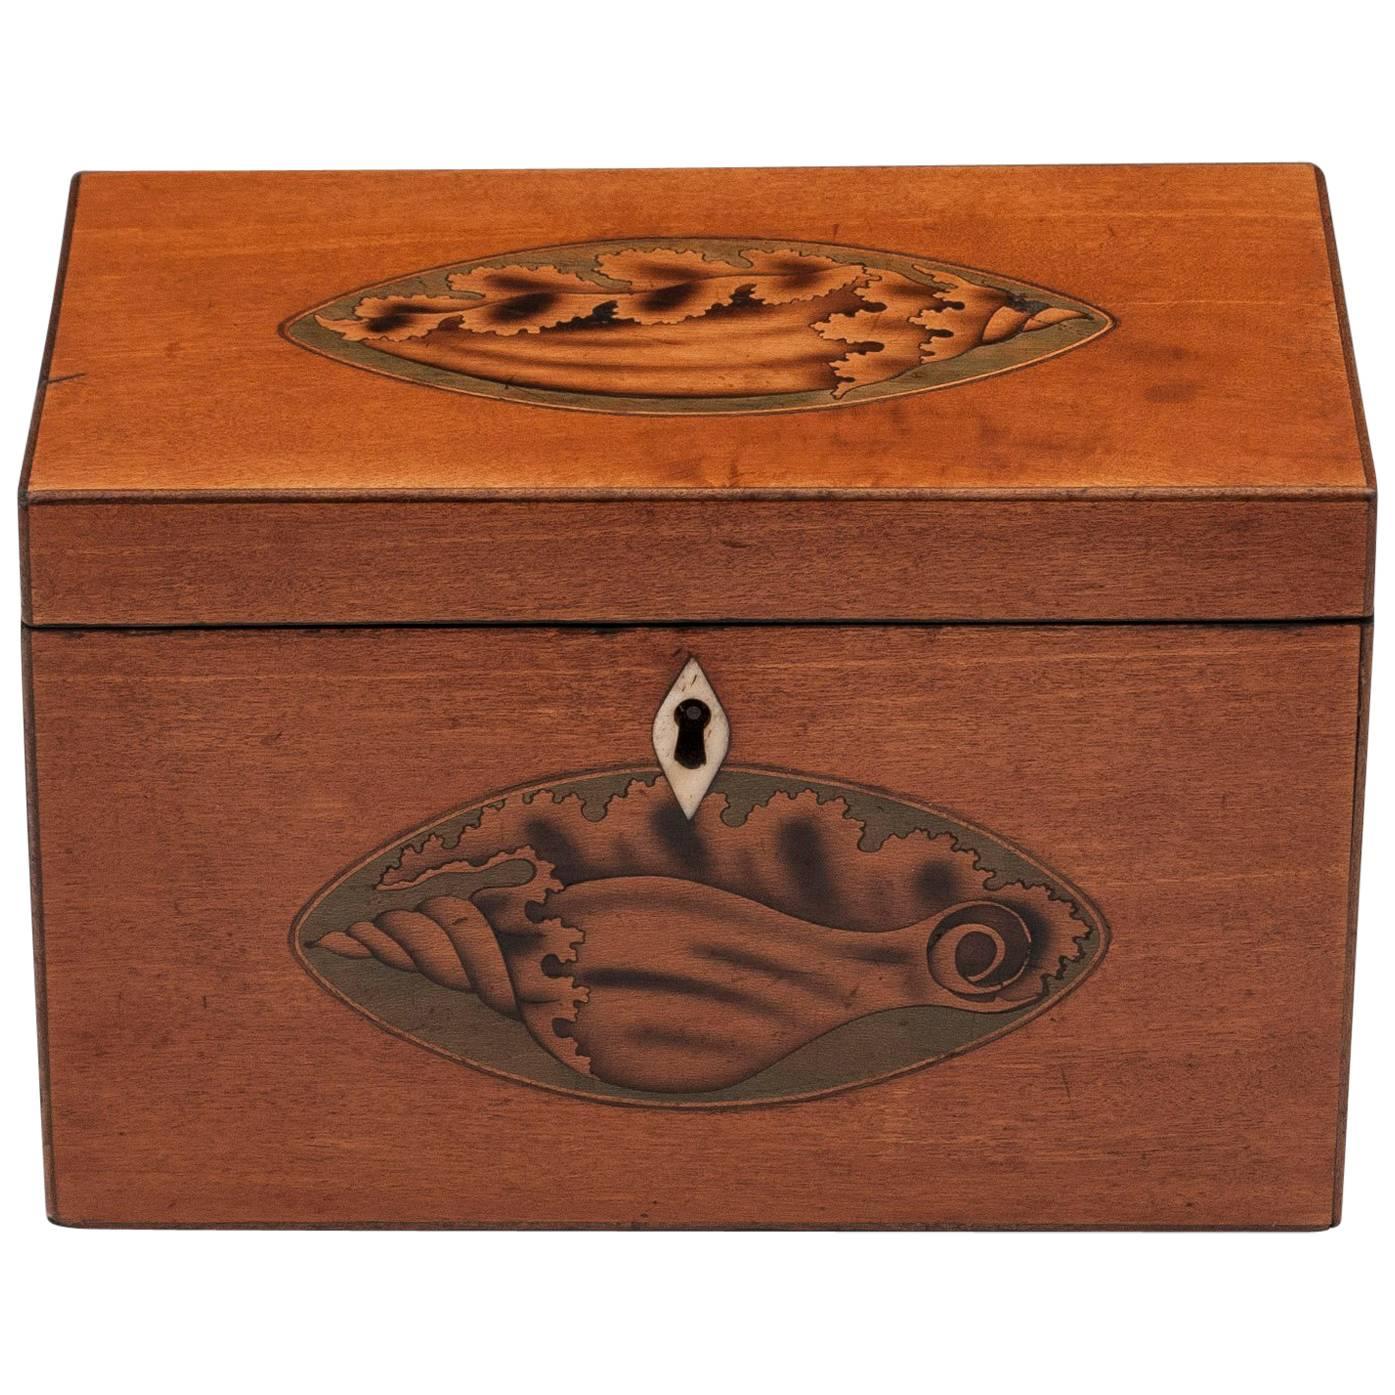 Satinwood Antique Tea Caddy with Inlaid Conch Shells, 18th Century